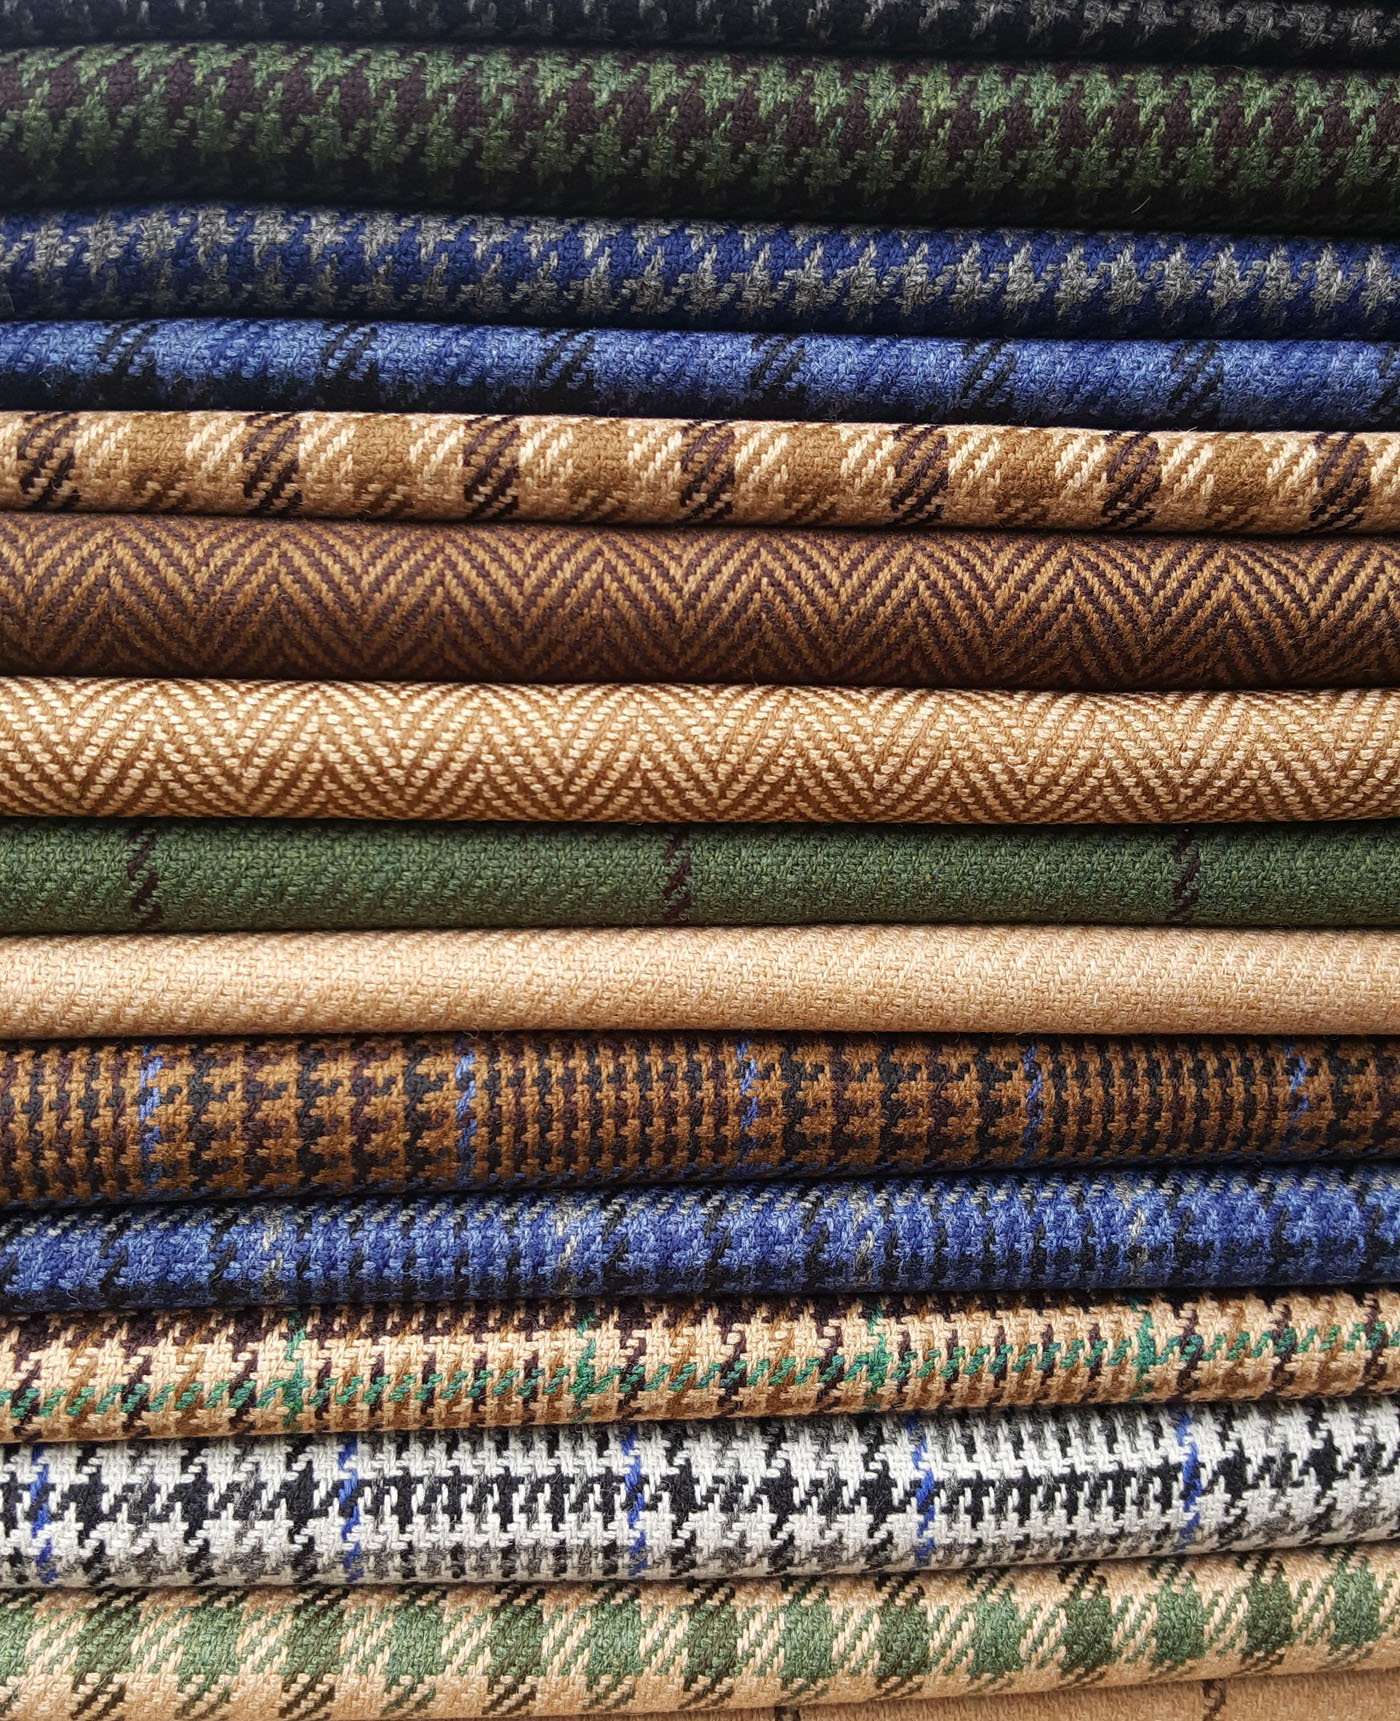 Fox Brothers & Co have a substantial range of fabrics to choose from in its archives